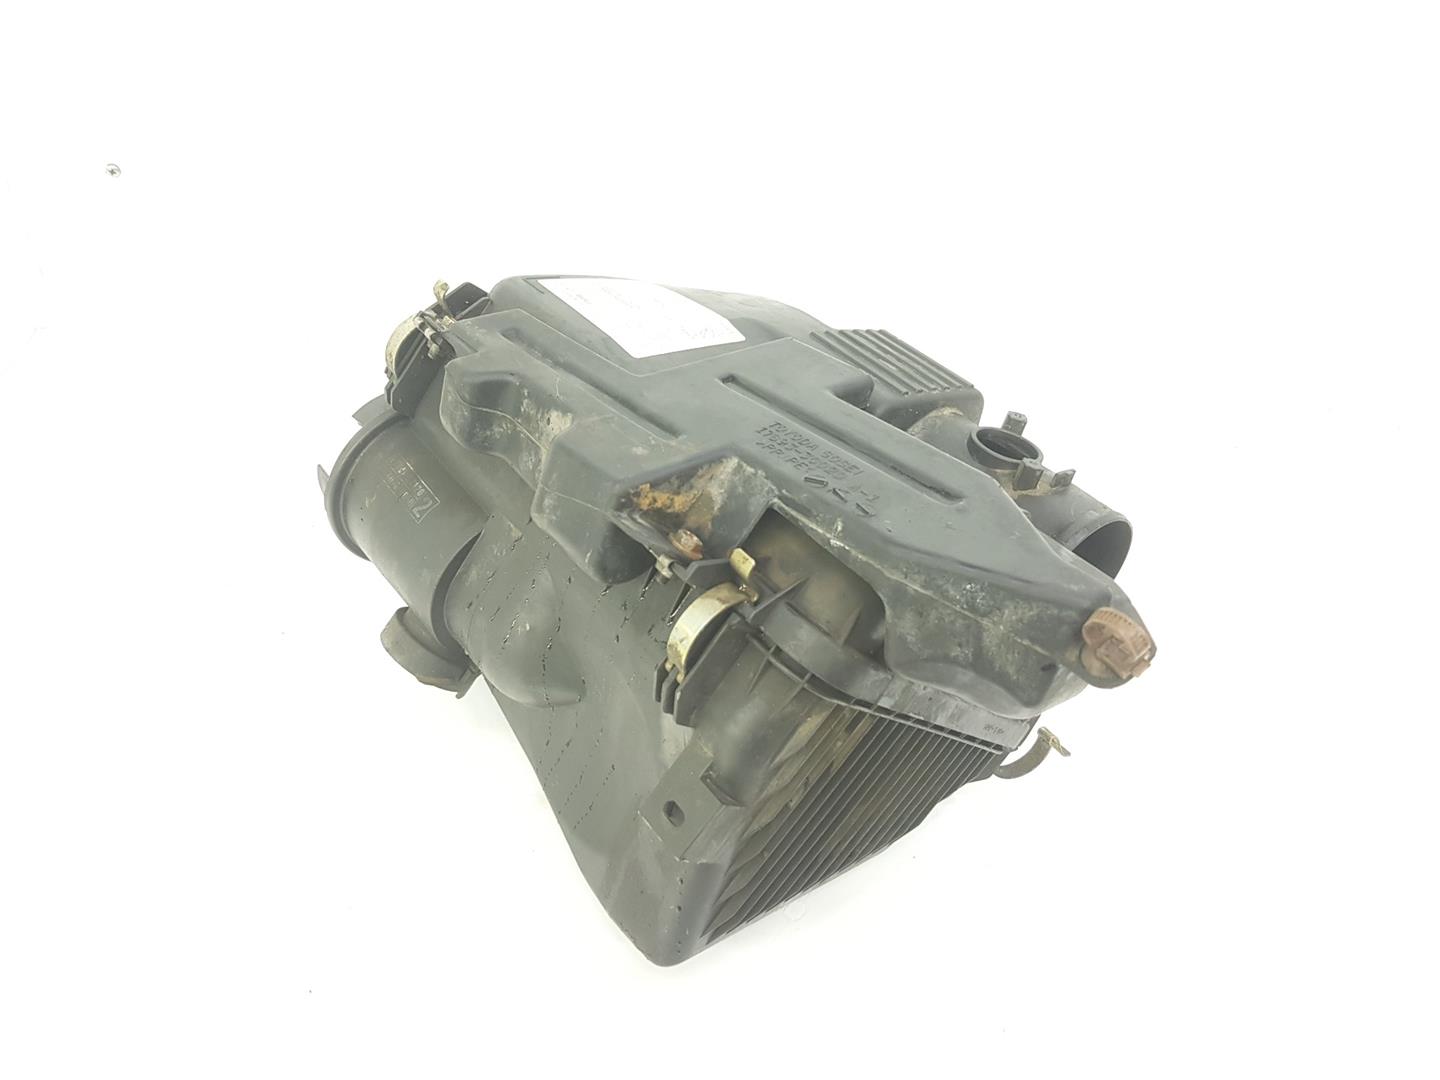 TOYOTA Land Cruiser 70 Series (1984-2024) Other Engine Compartment Parts 1789330020, 1789330020 19916740